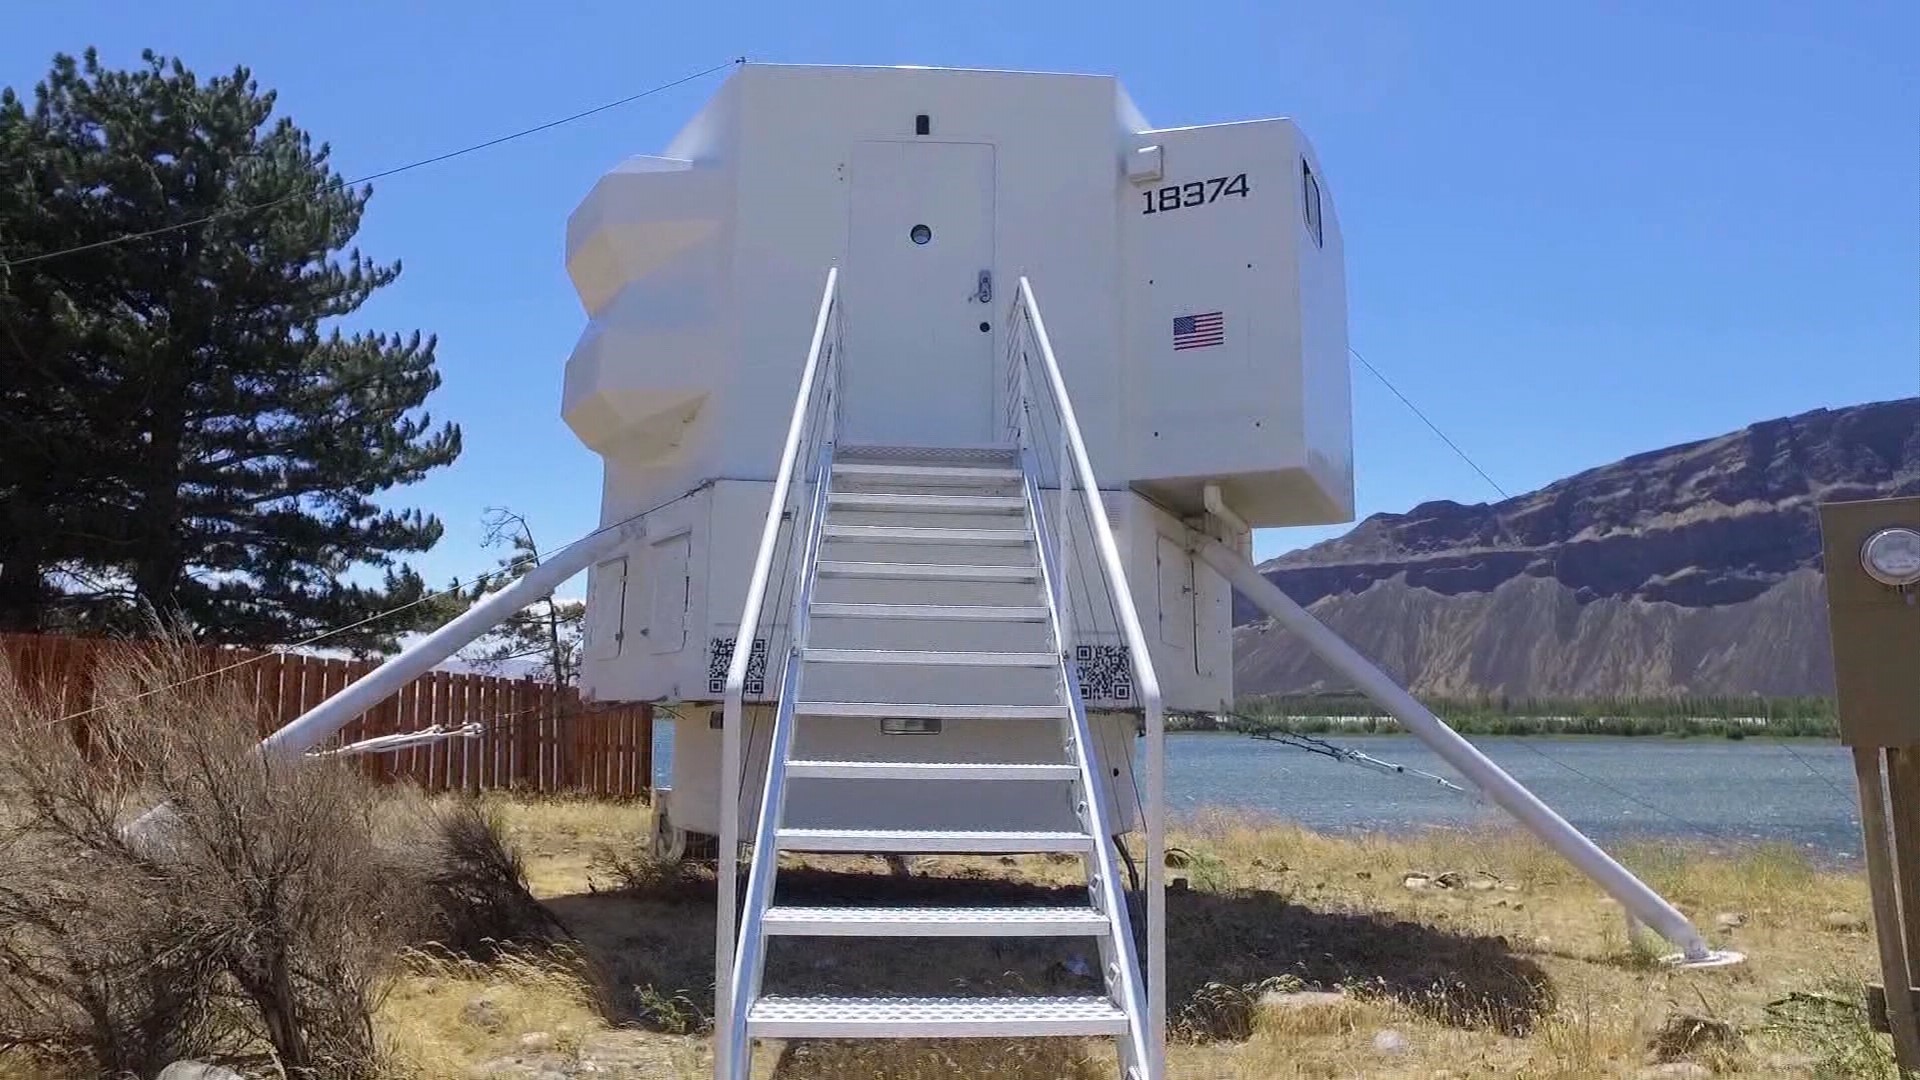 Kurt Hughes built his dream house, or rather, his dream spaceship on the bank of the Columbia River.